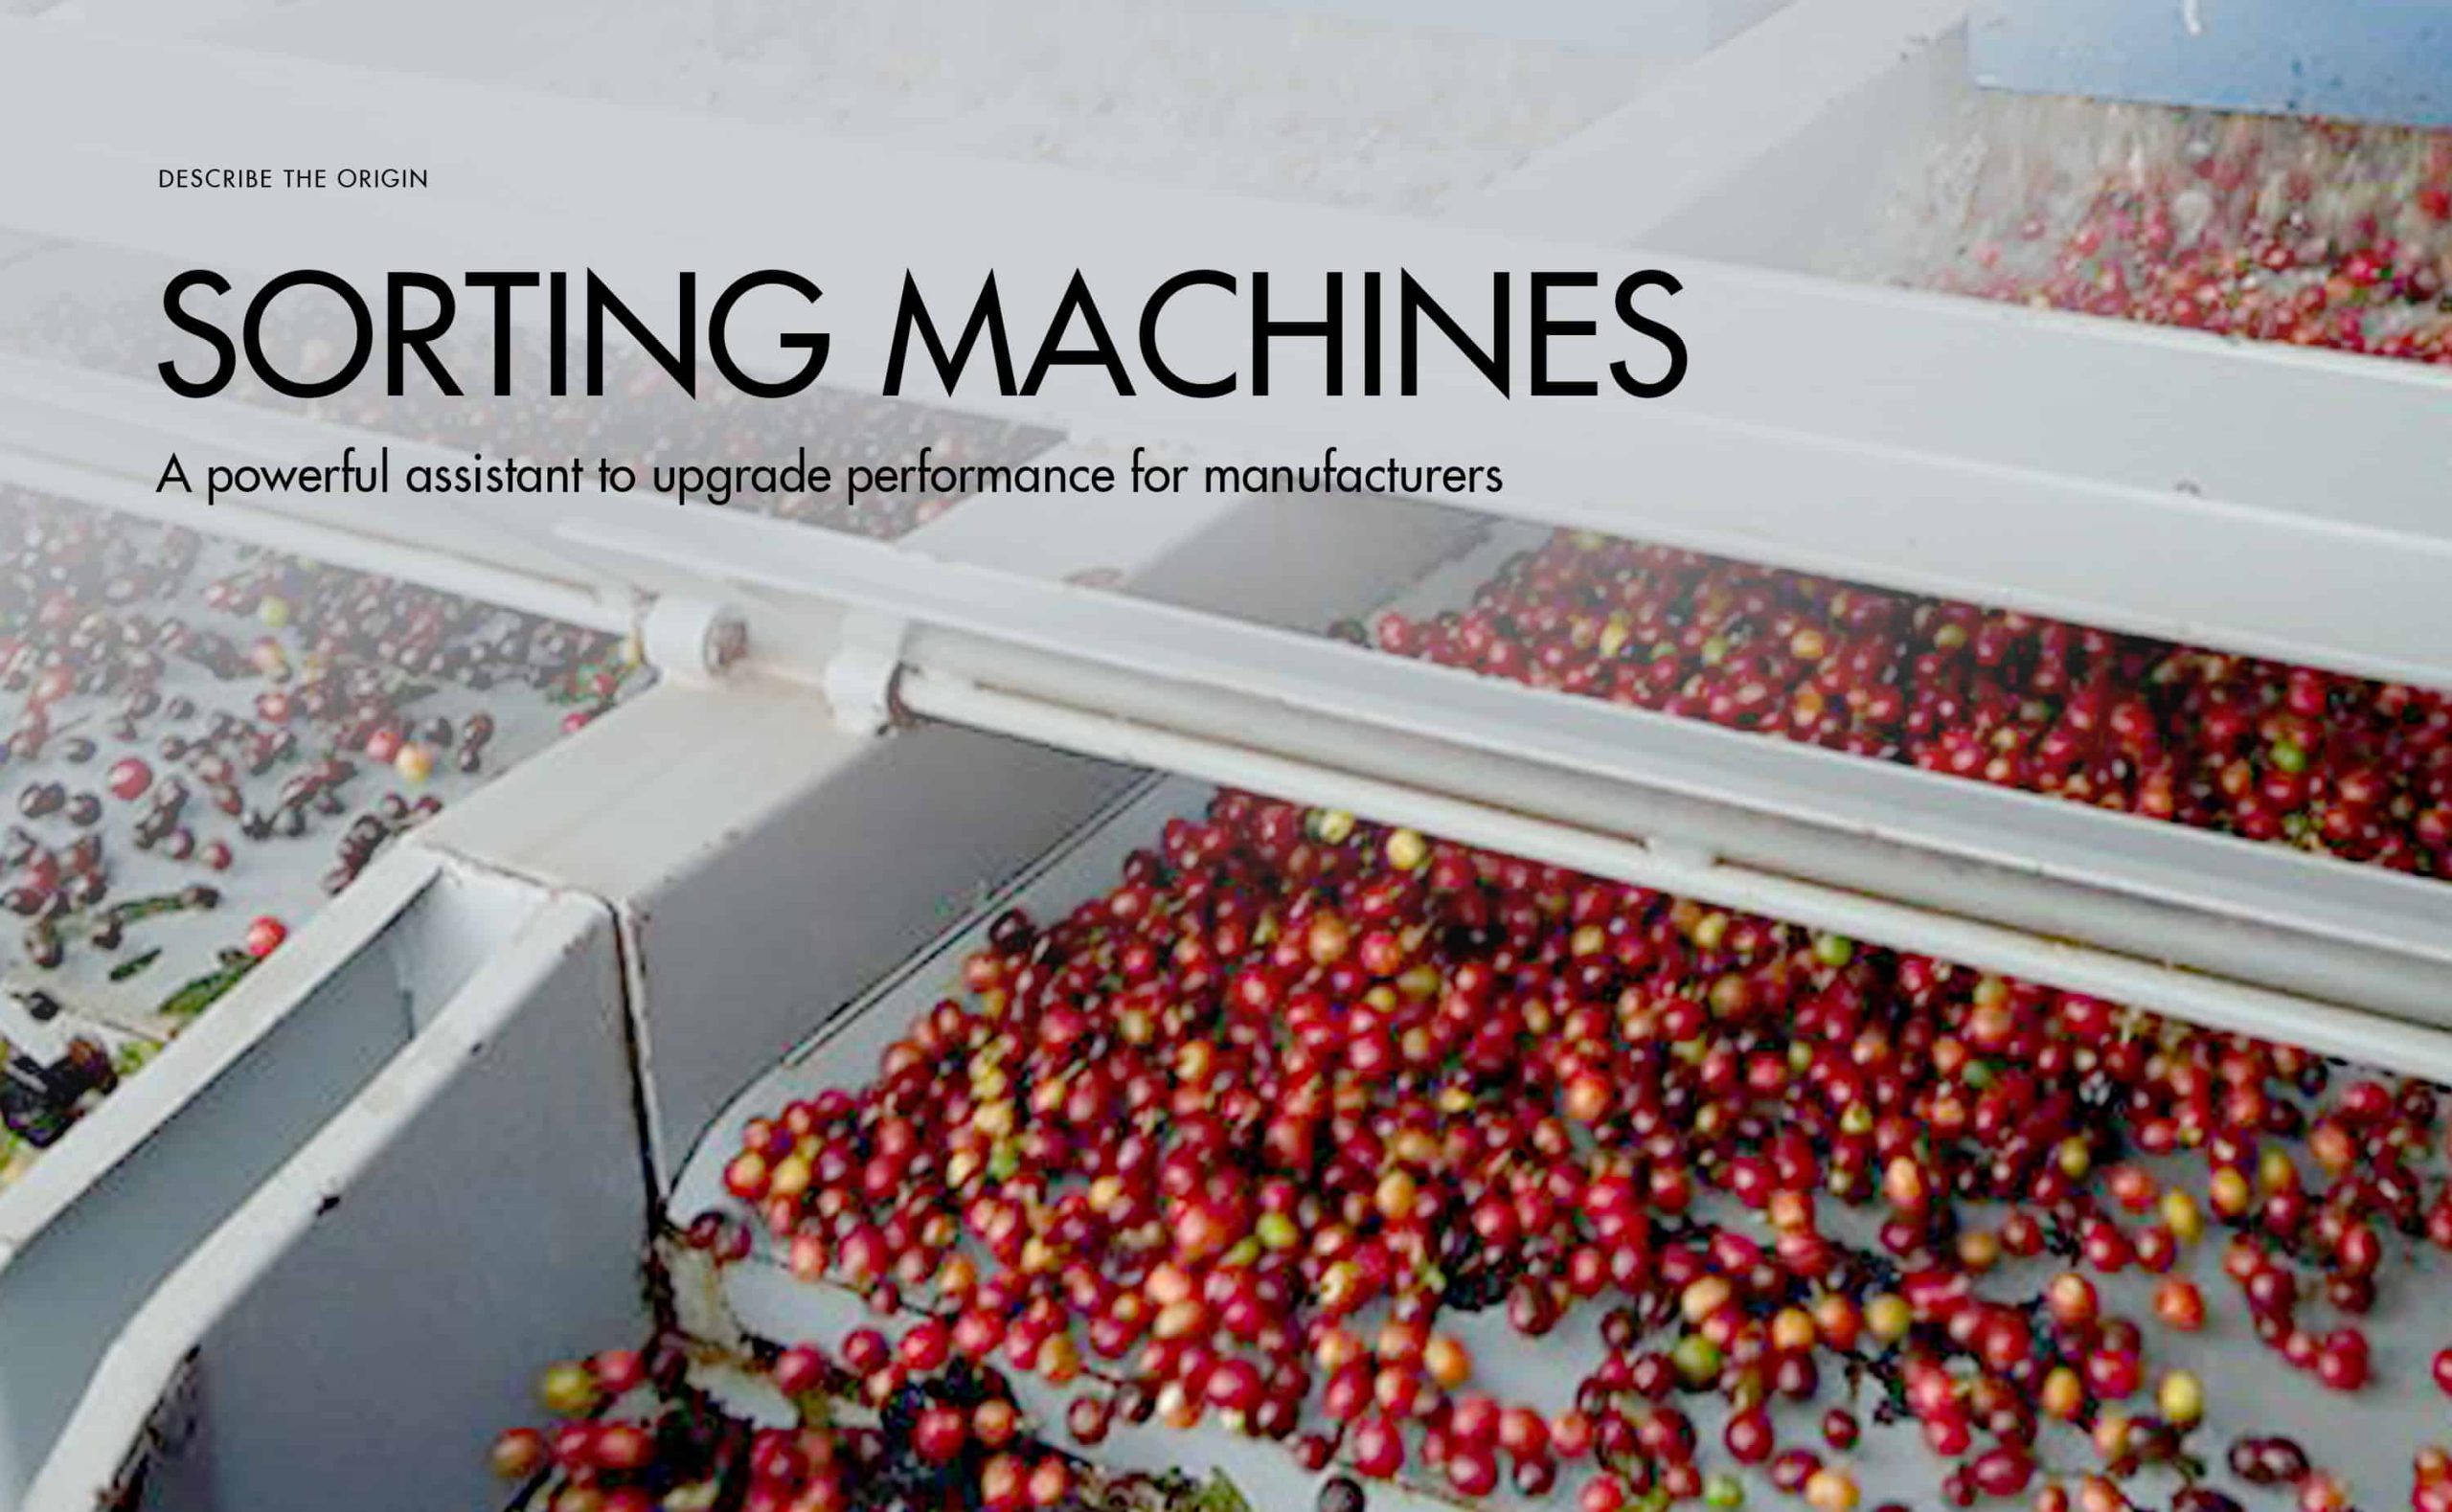 Coffee sorting machine – A powerful assistant to upgrade performance for manufacturers